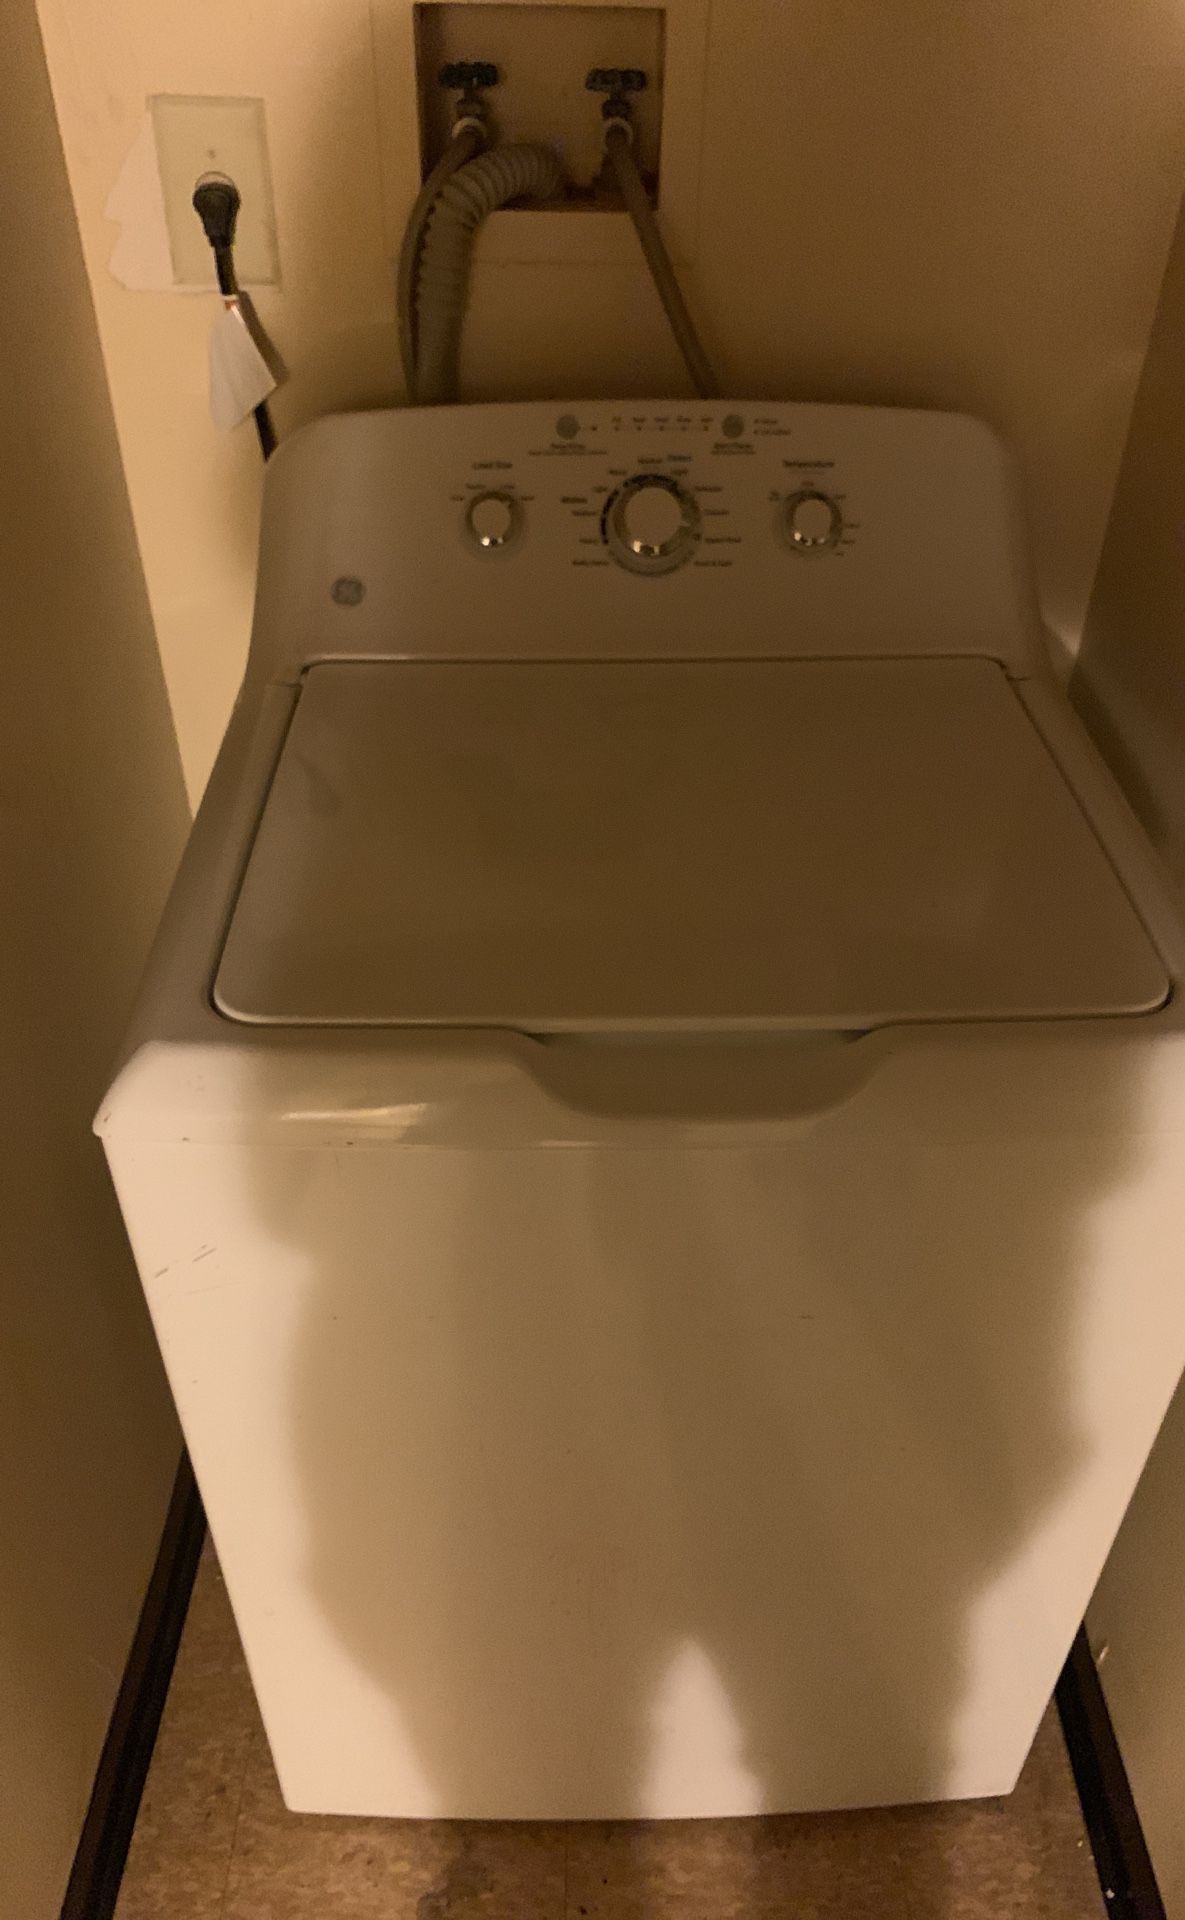 Washer for sale and dryer I had it for only 6month I have to move and the house I have has a brand new one there for I don’t need the washer in dryer